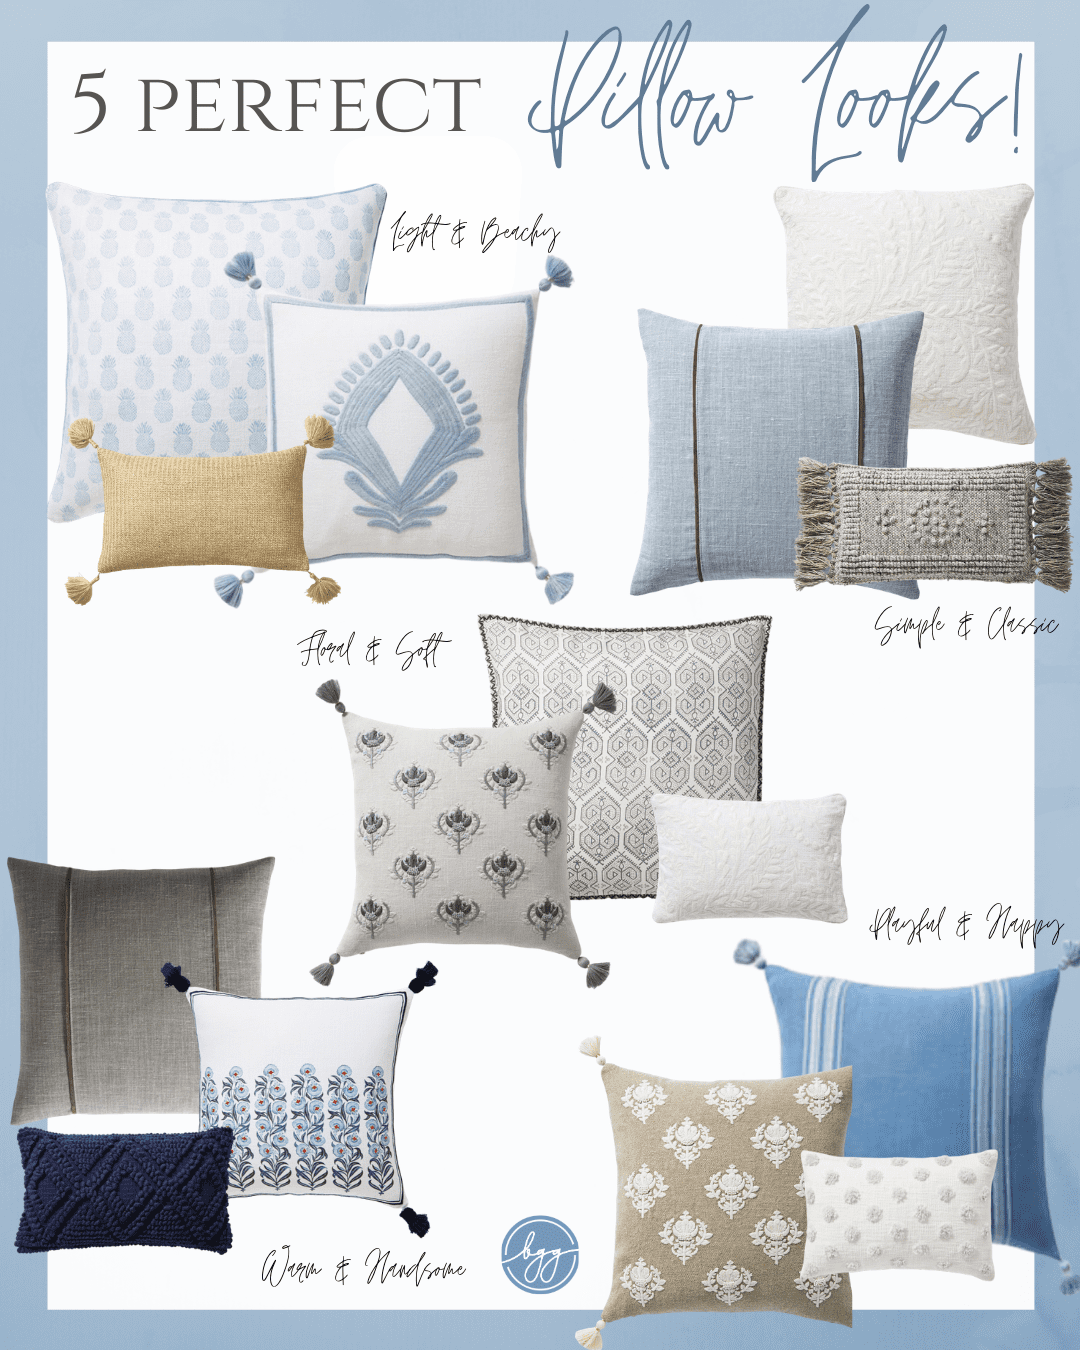 5 different looks from the Serena and Lily Pillows Sale.